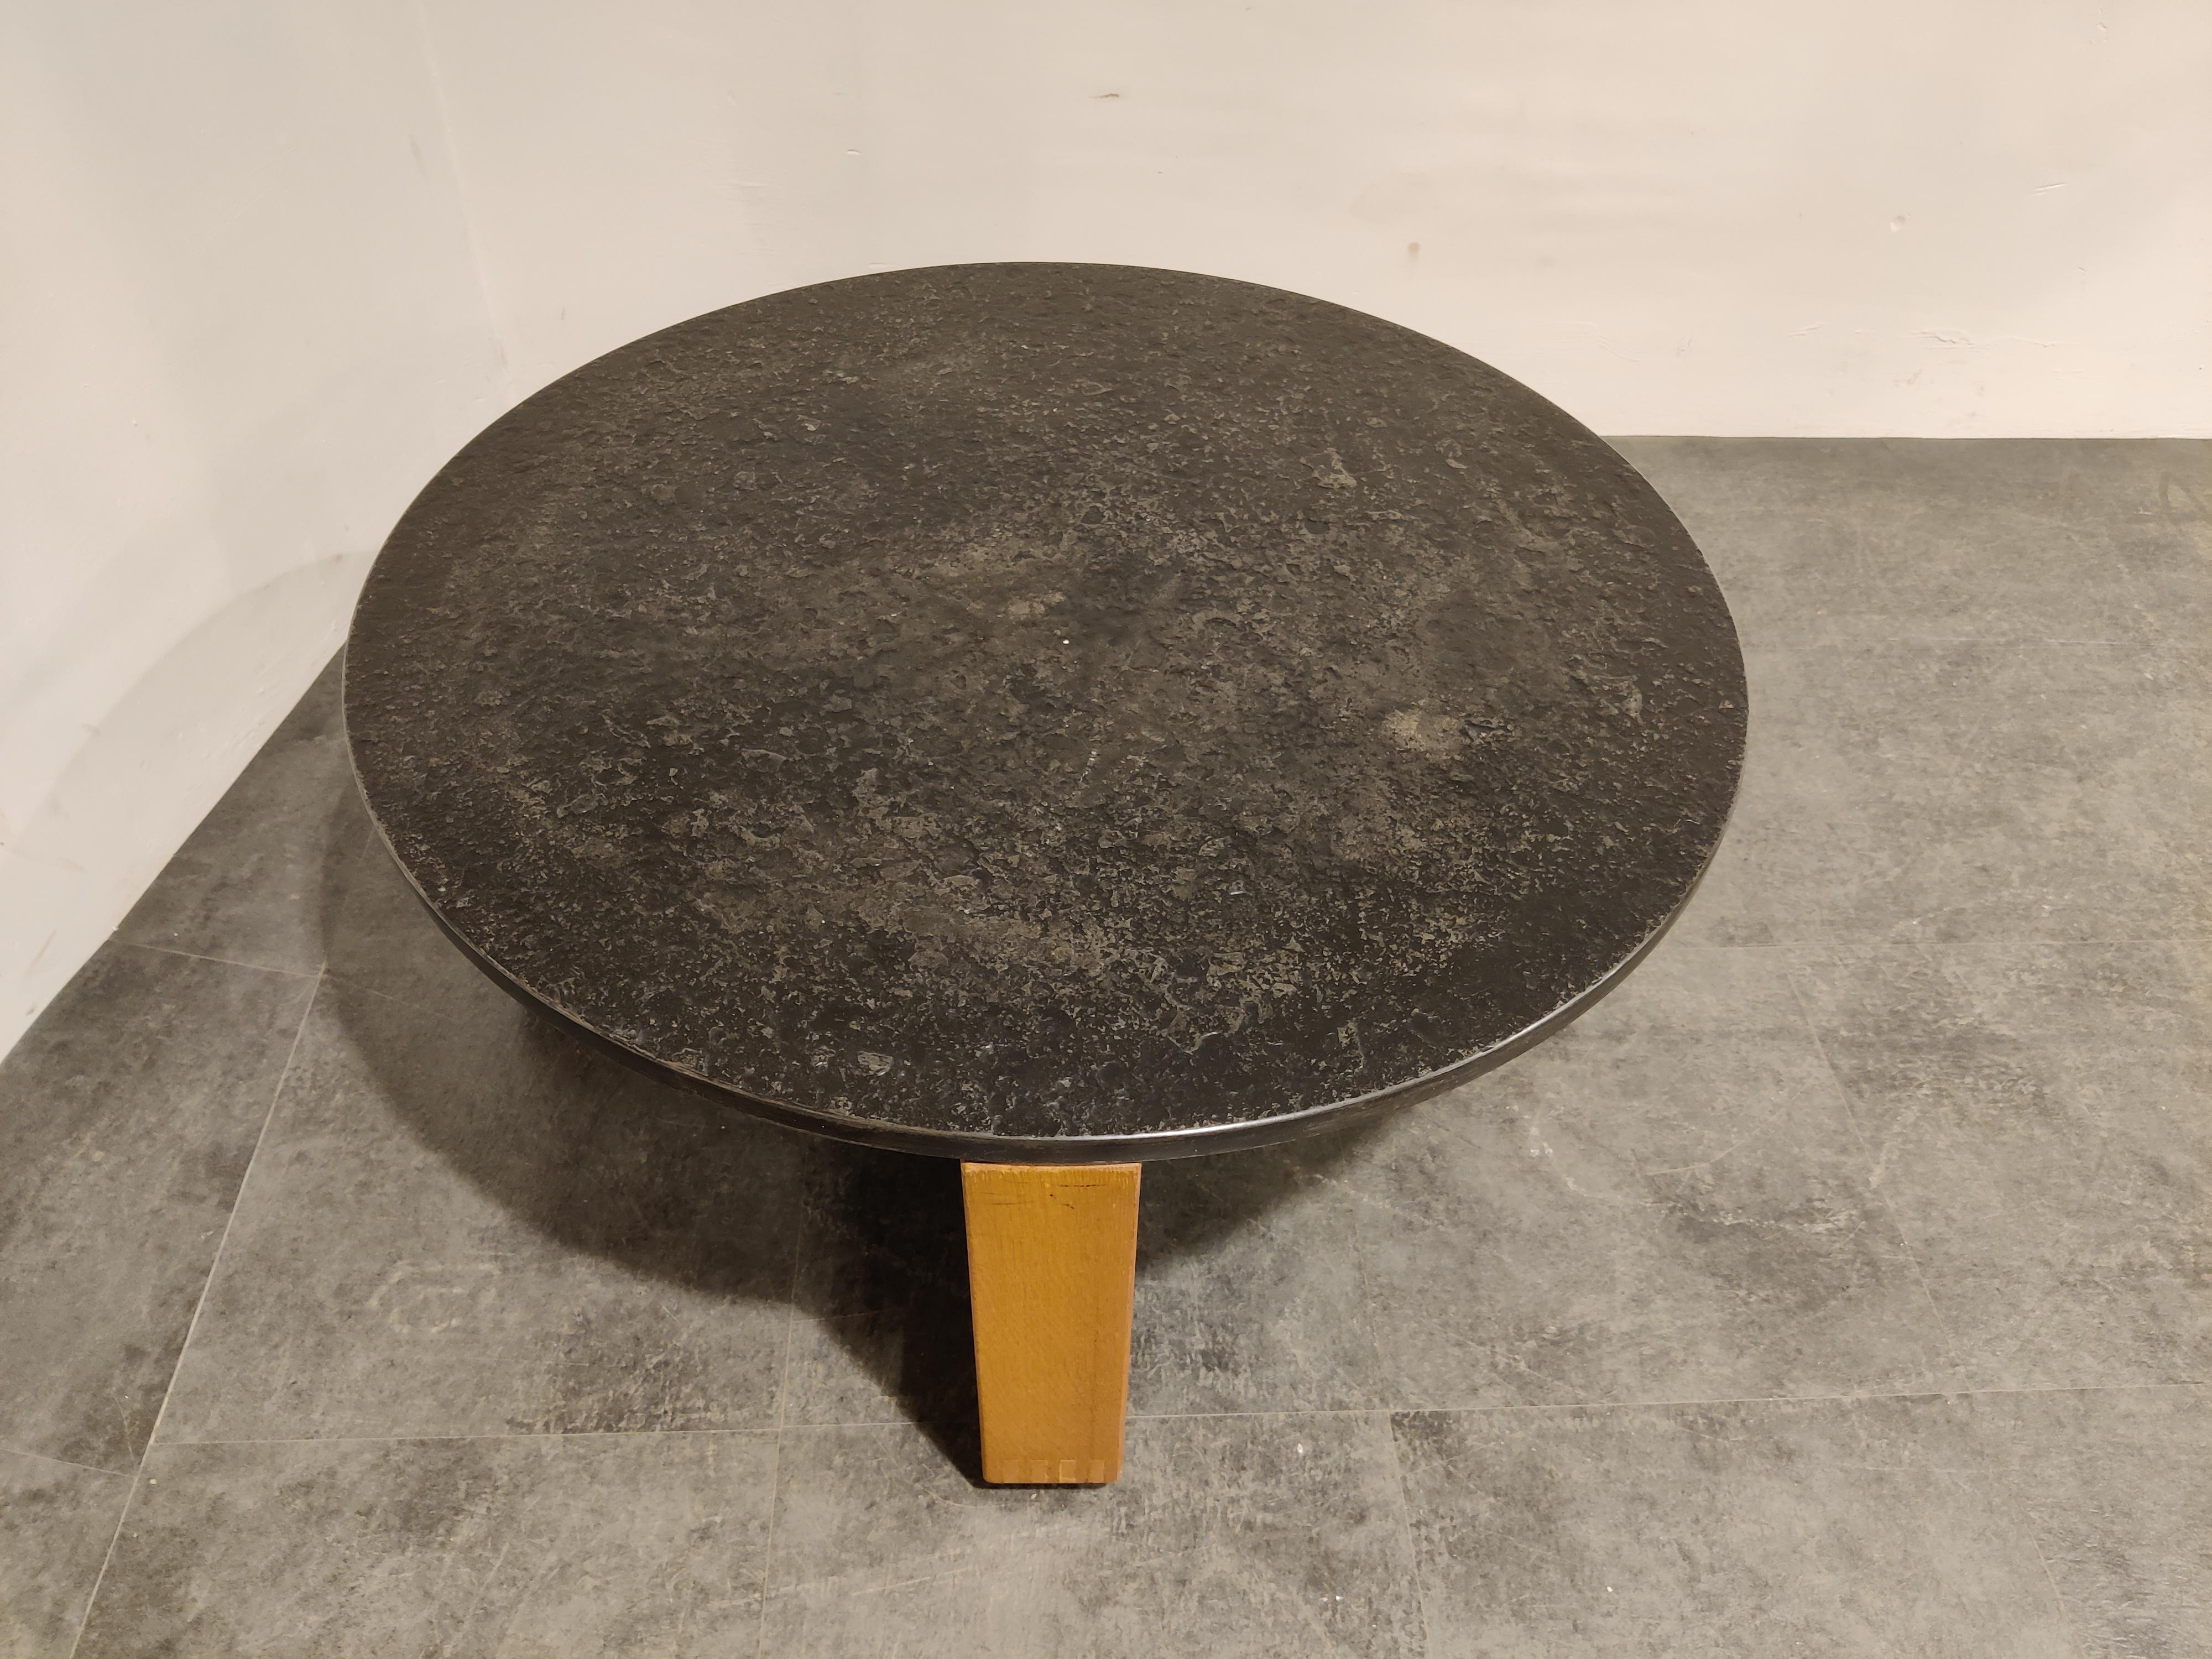 Brutalist style coffee table with a nice interlocking wooden frame and a round slate stone top. 

Stamped underneath, but no manufacturer/designer could be linked.

Made in Germany around the mid 1960s

Good condition.

Dimensions:
Height: